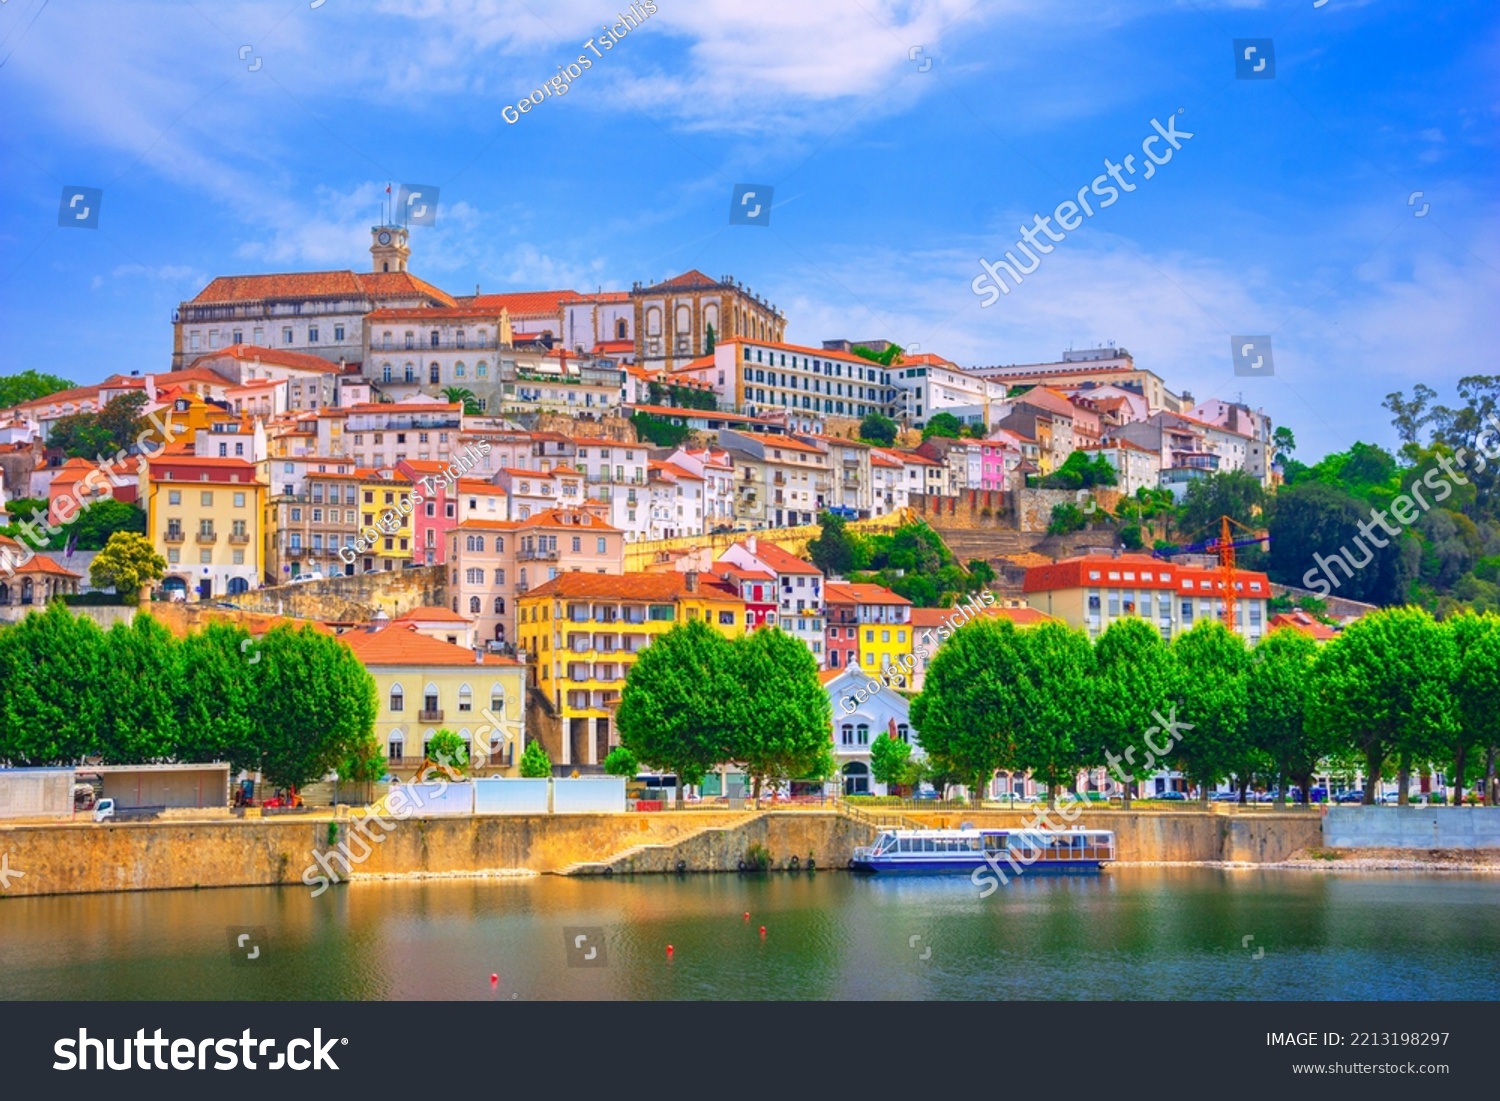 View of cityscape of old town of Coimbra, Portugal #2213198297